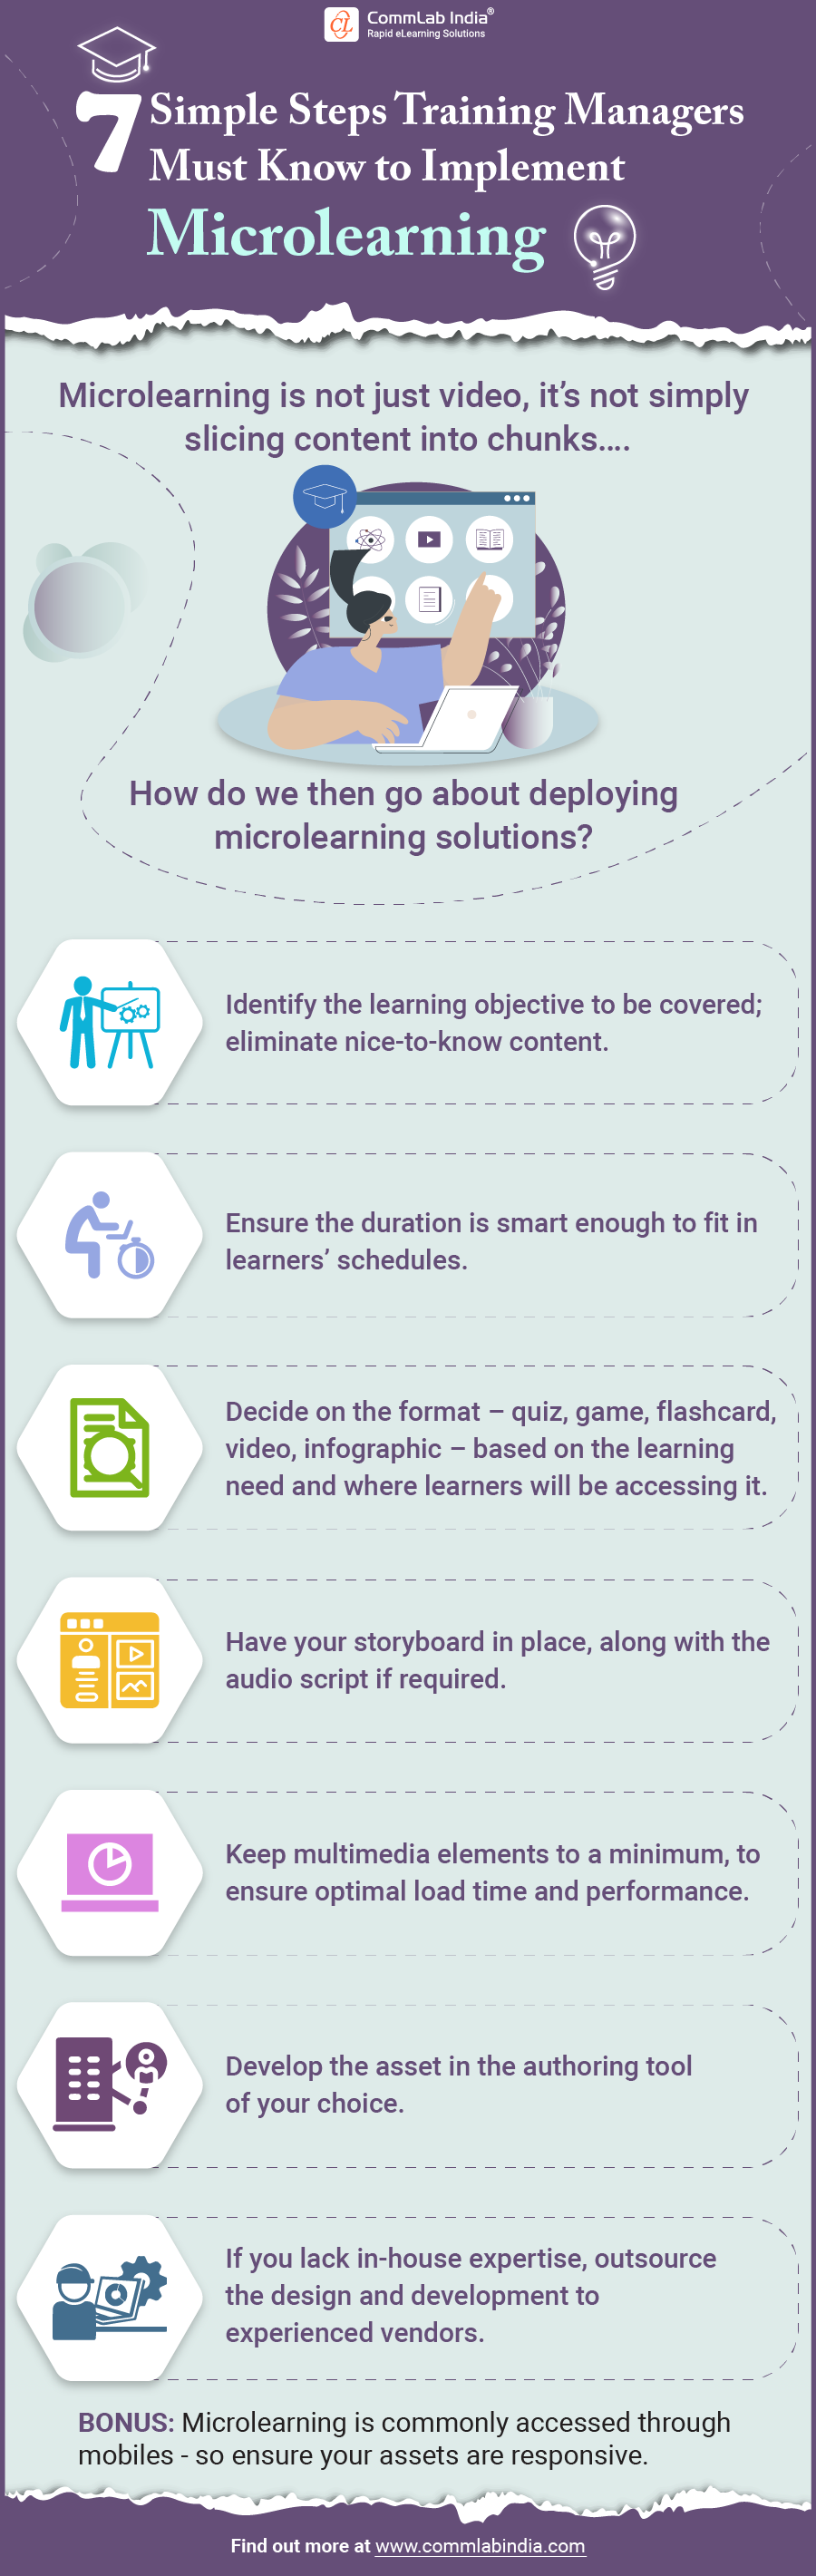 Winning Steps to Implement Microlearning